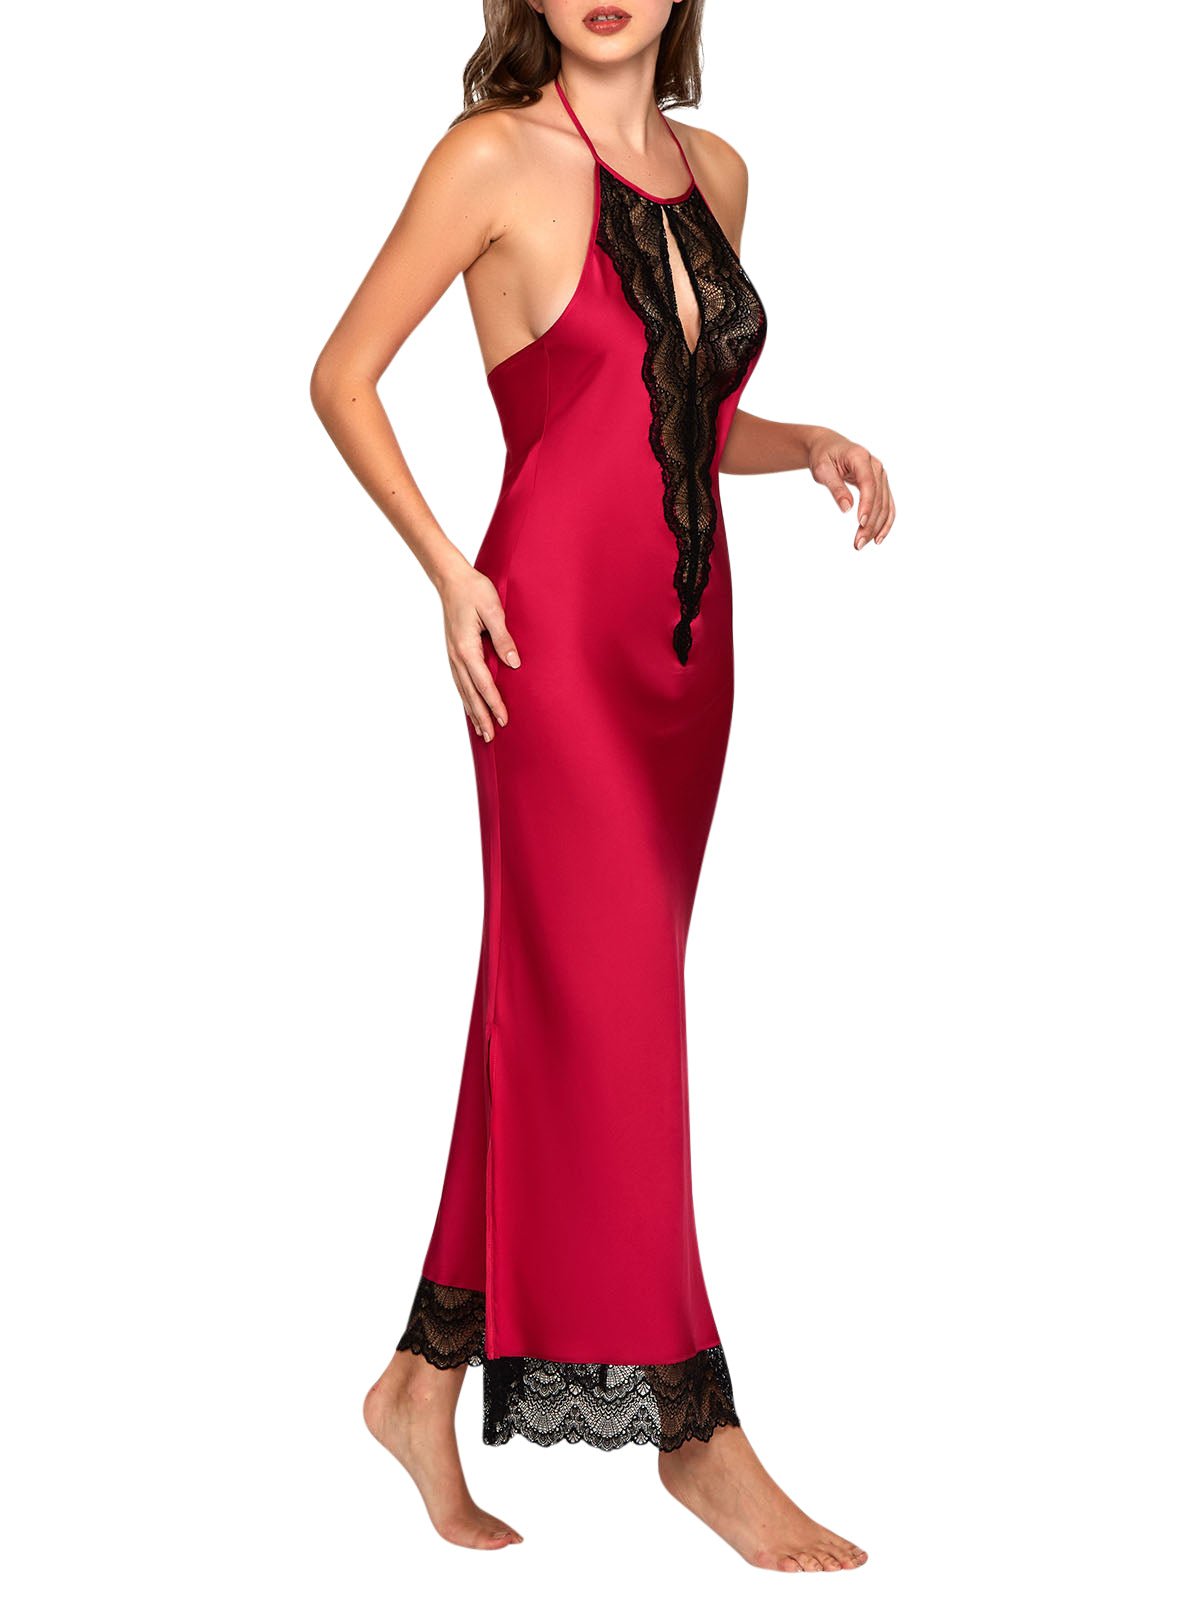 iCollection Chemise Tess Gown